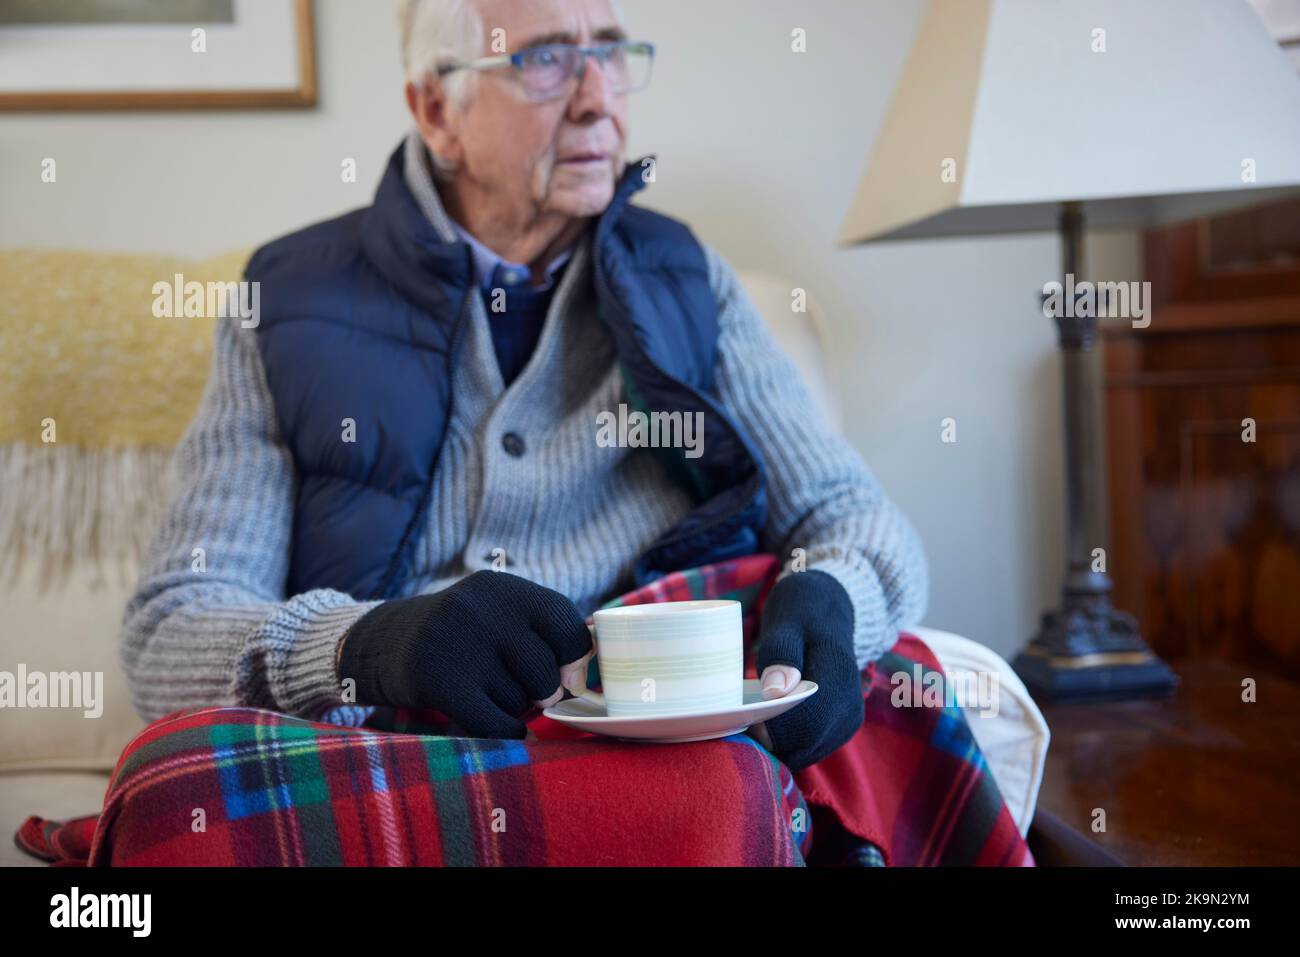 Senior Man Wearing Extra Clothes With Hot Drink Trying To Keep Warm At Home In Energy Crisis Stock Photo